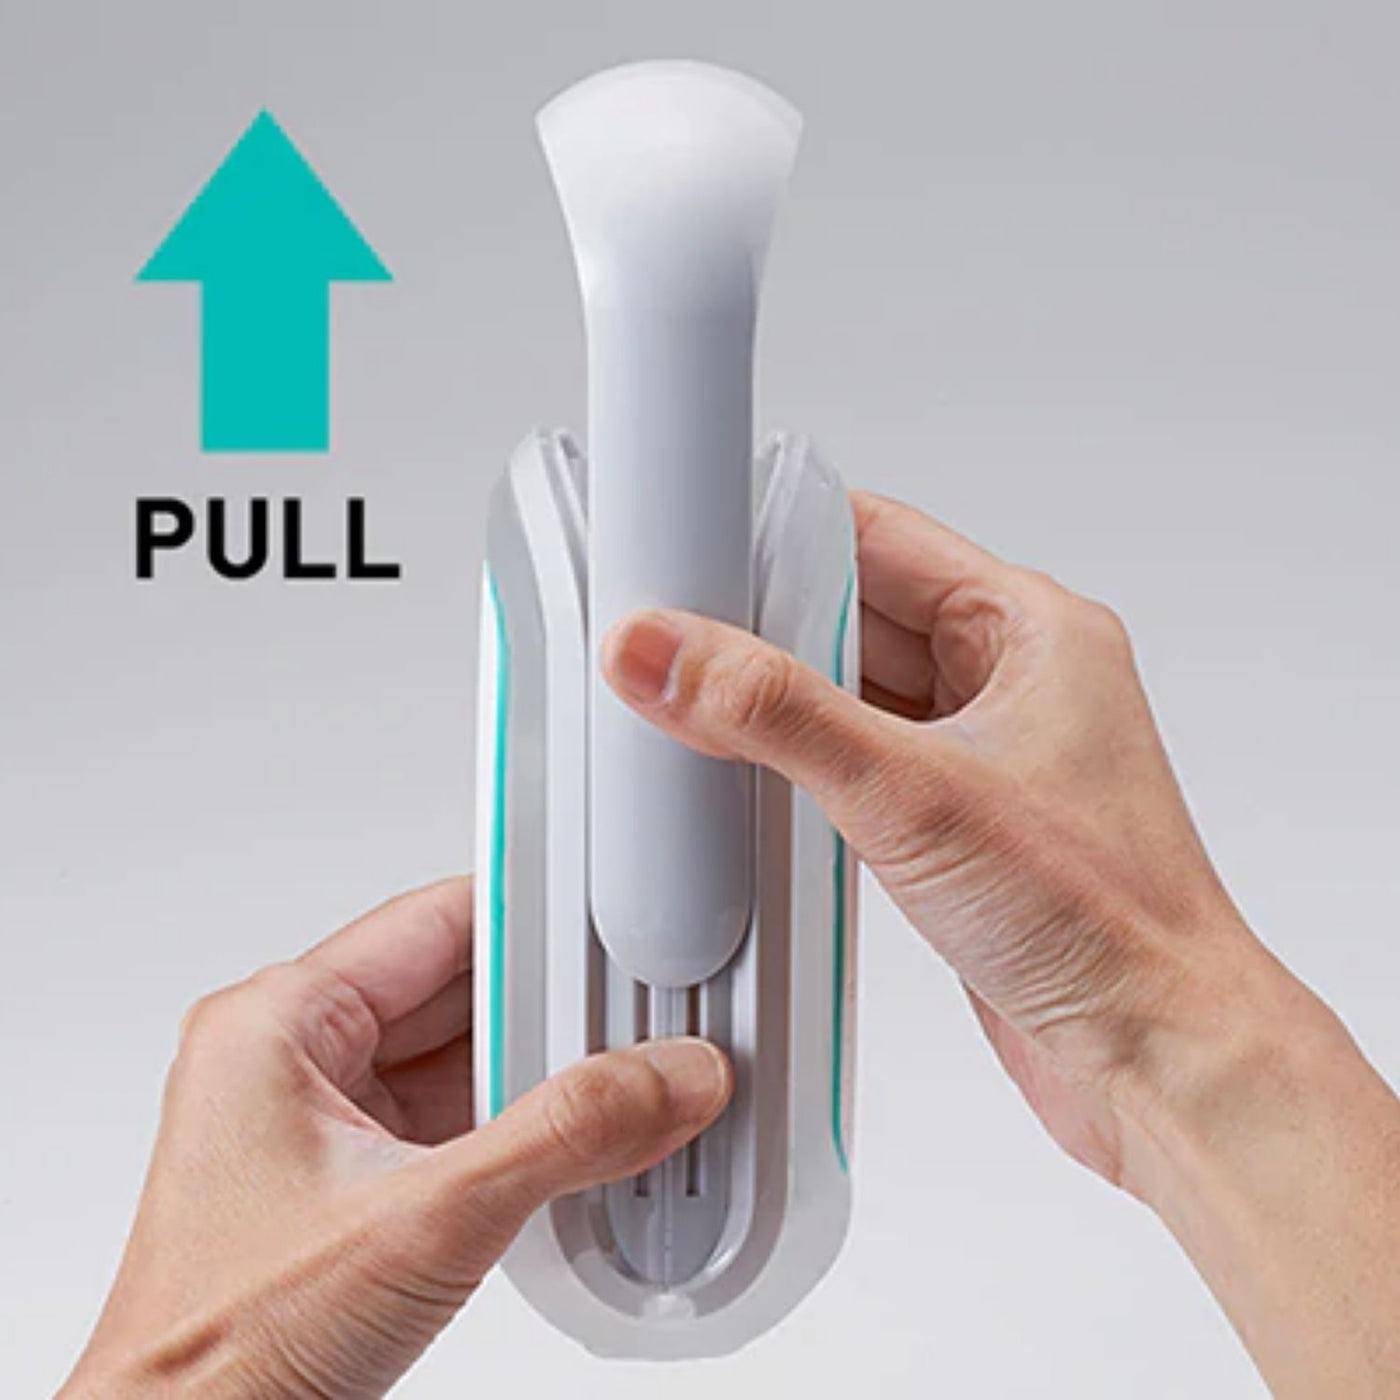 Tenga Timing Trainer Keep Masturbator Set With or Without Training pic